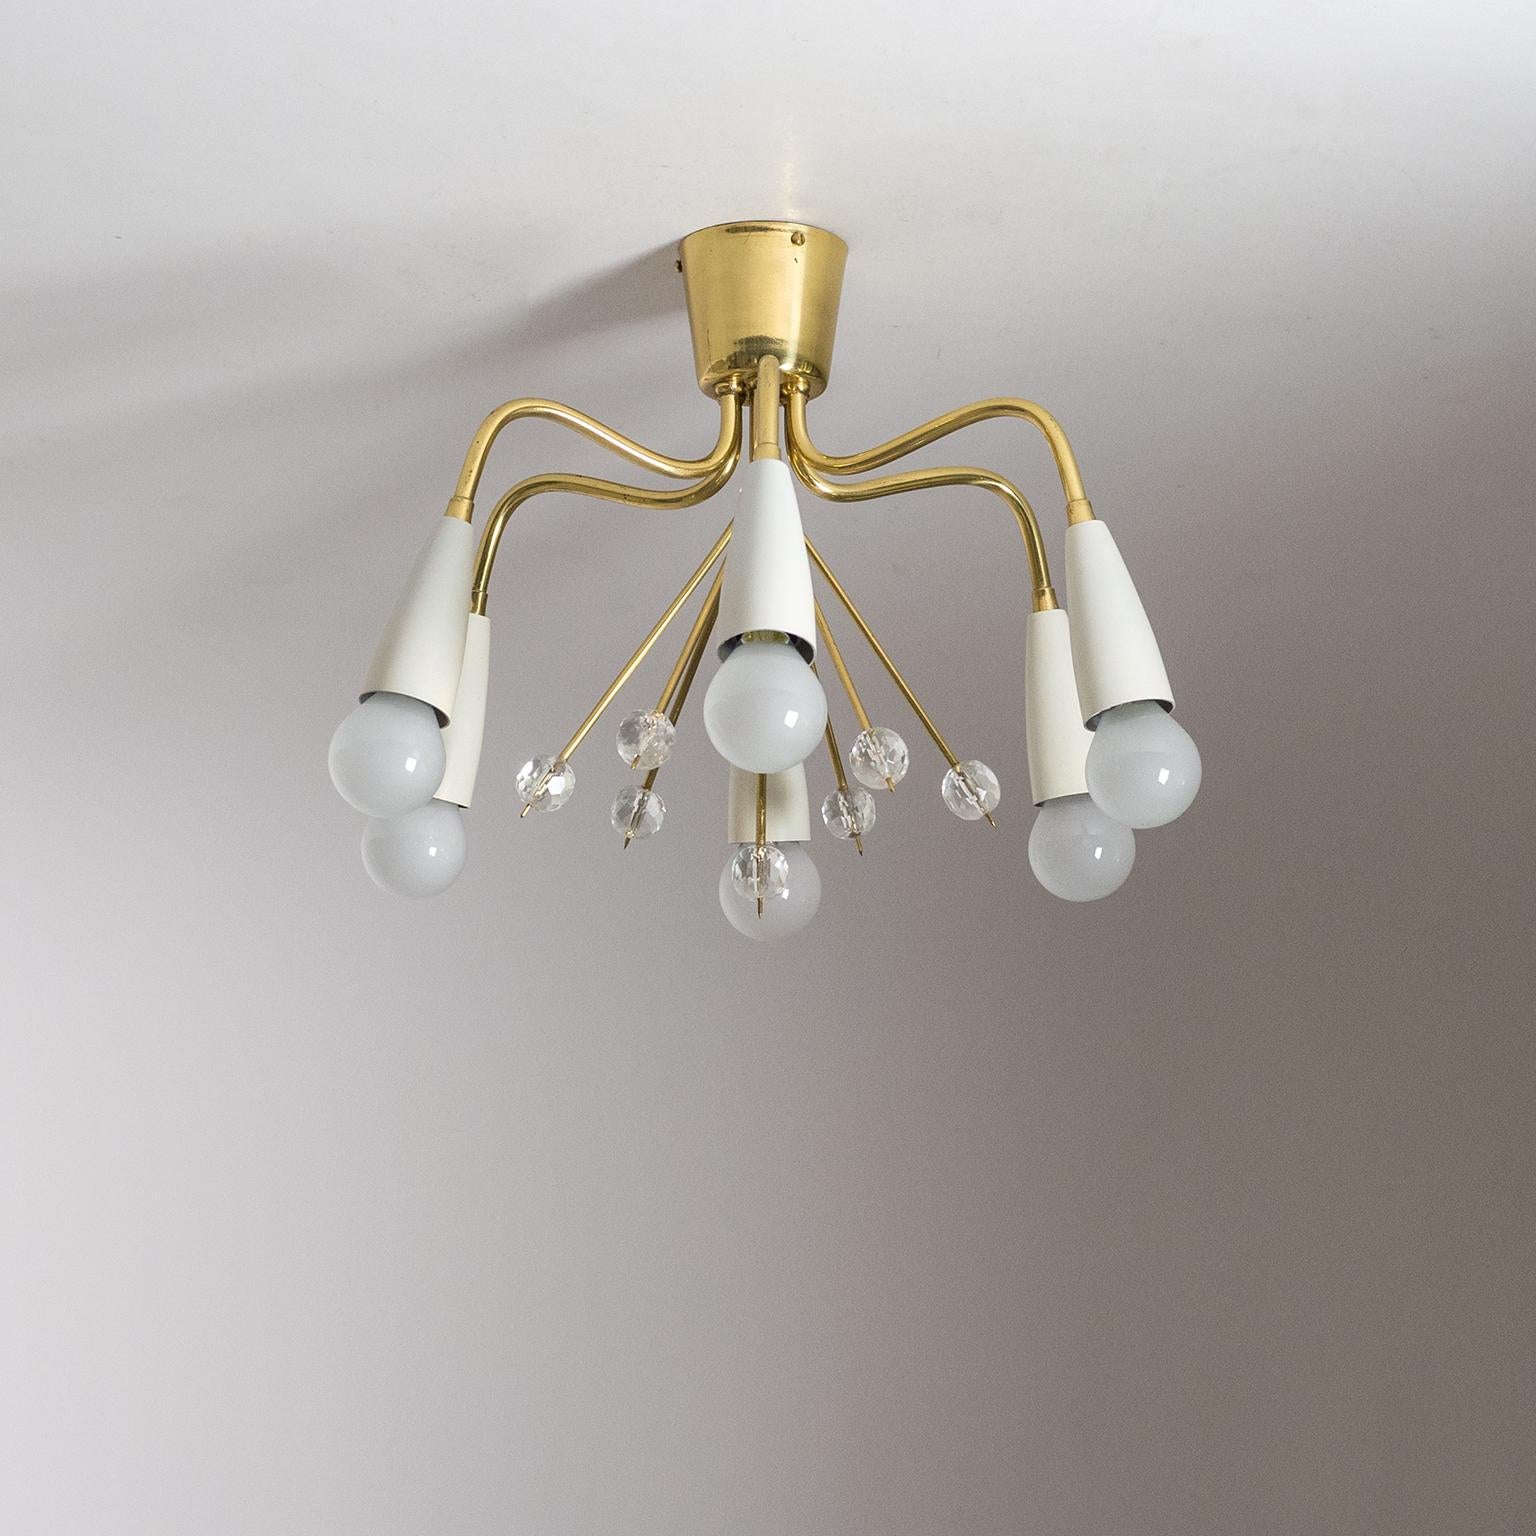 Superb pair of ceiling lights from the 